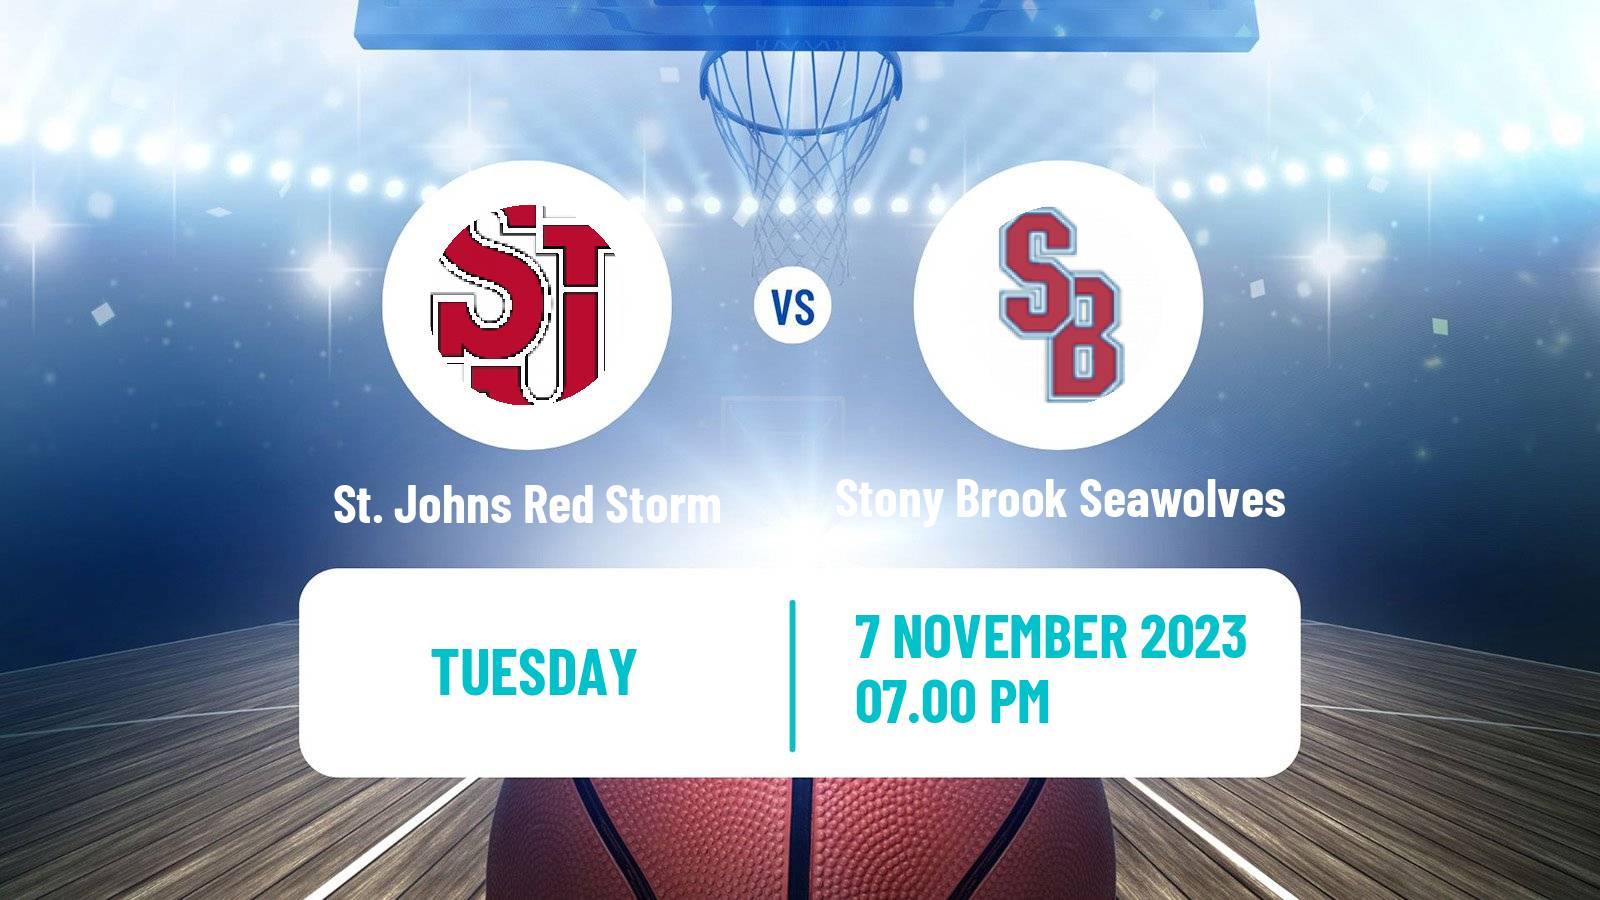 Basketball NCAA College Basketball St. Johns Red Storm - Stony Brook Seawolves